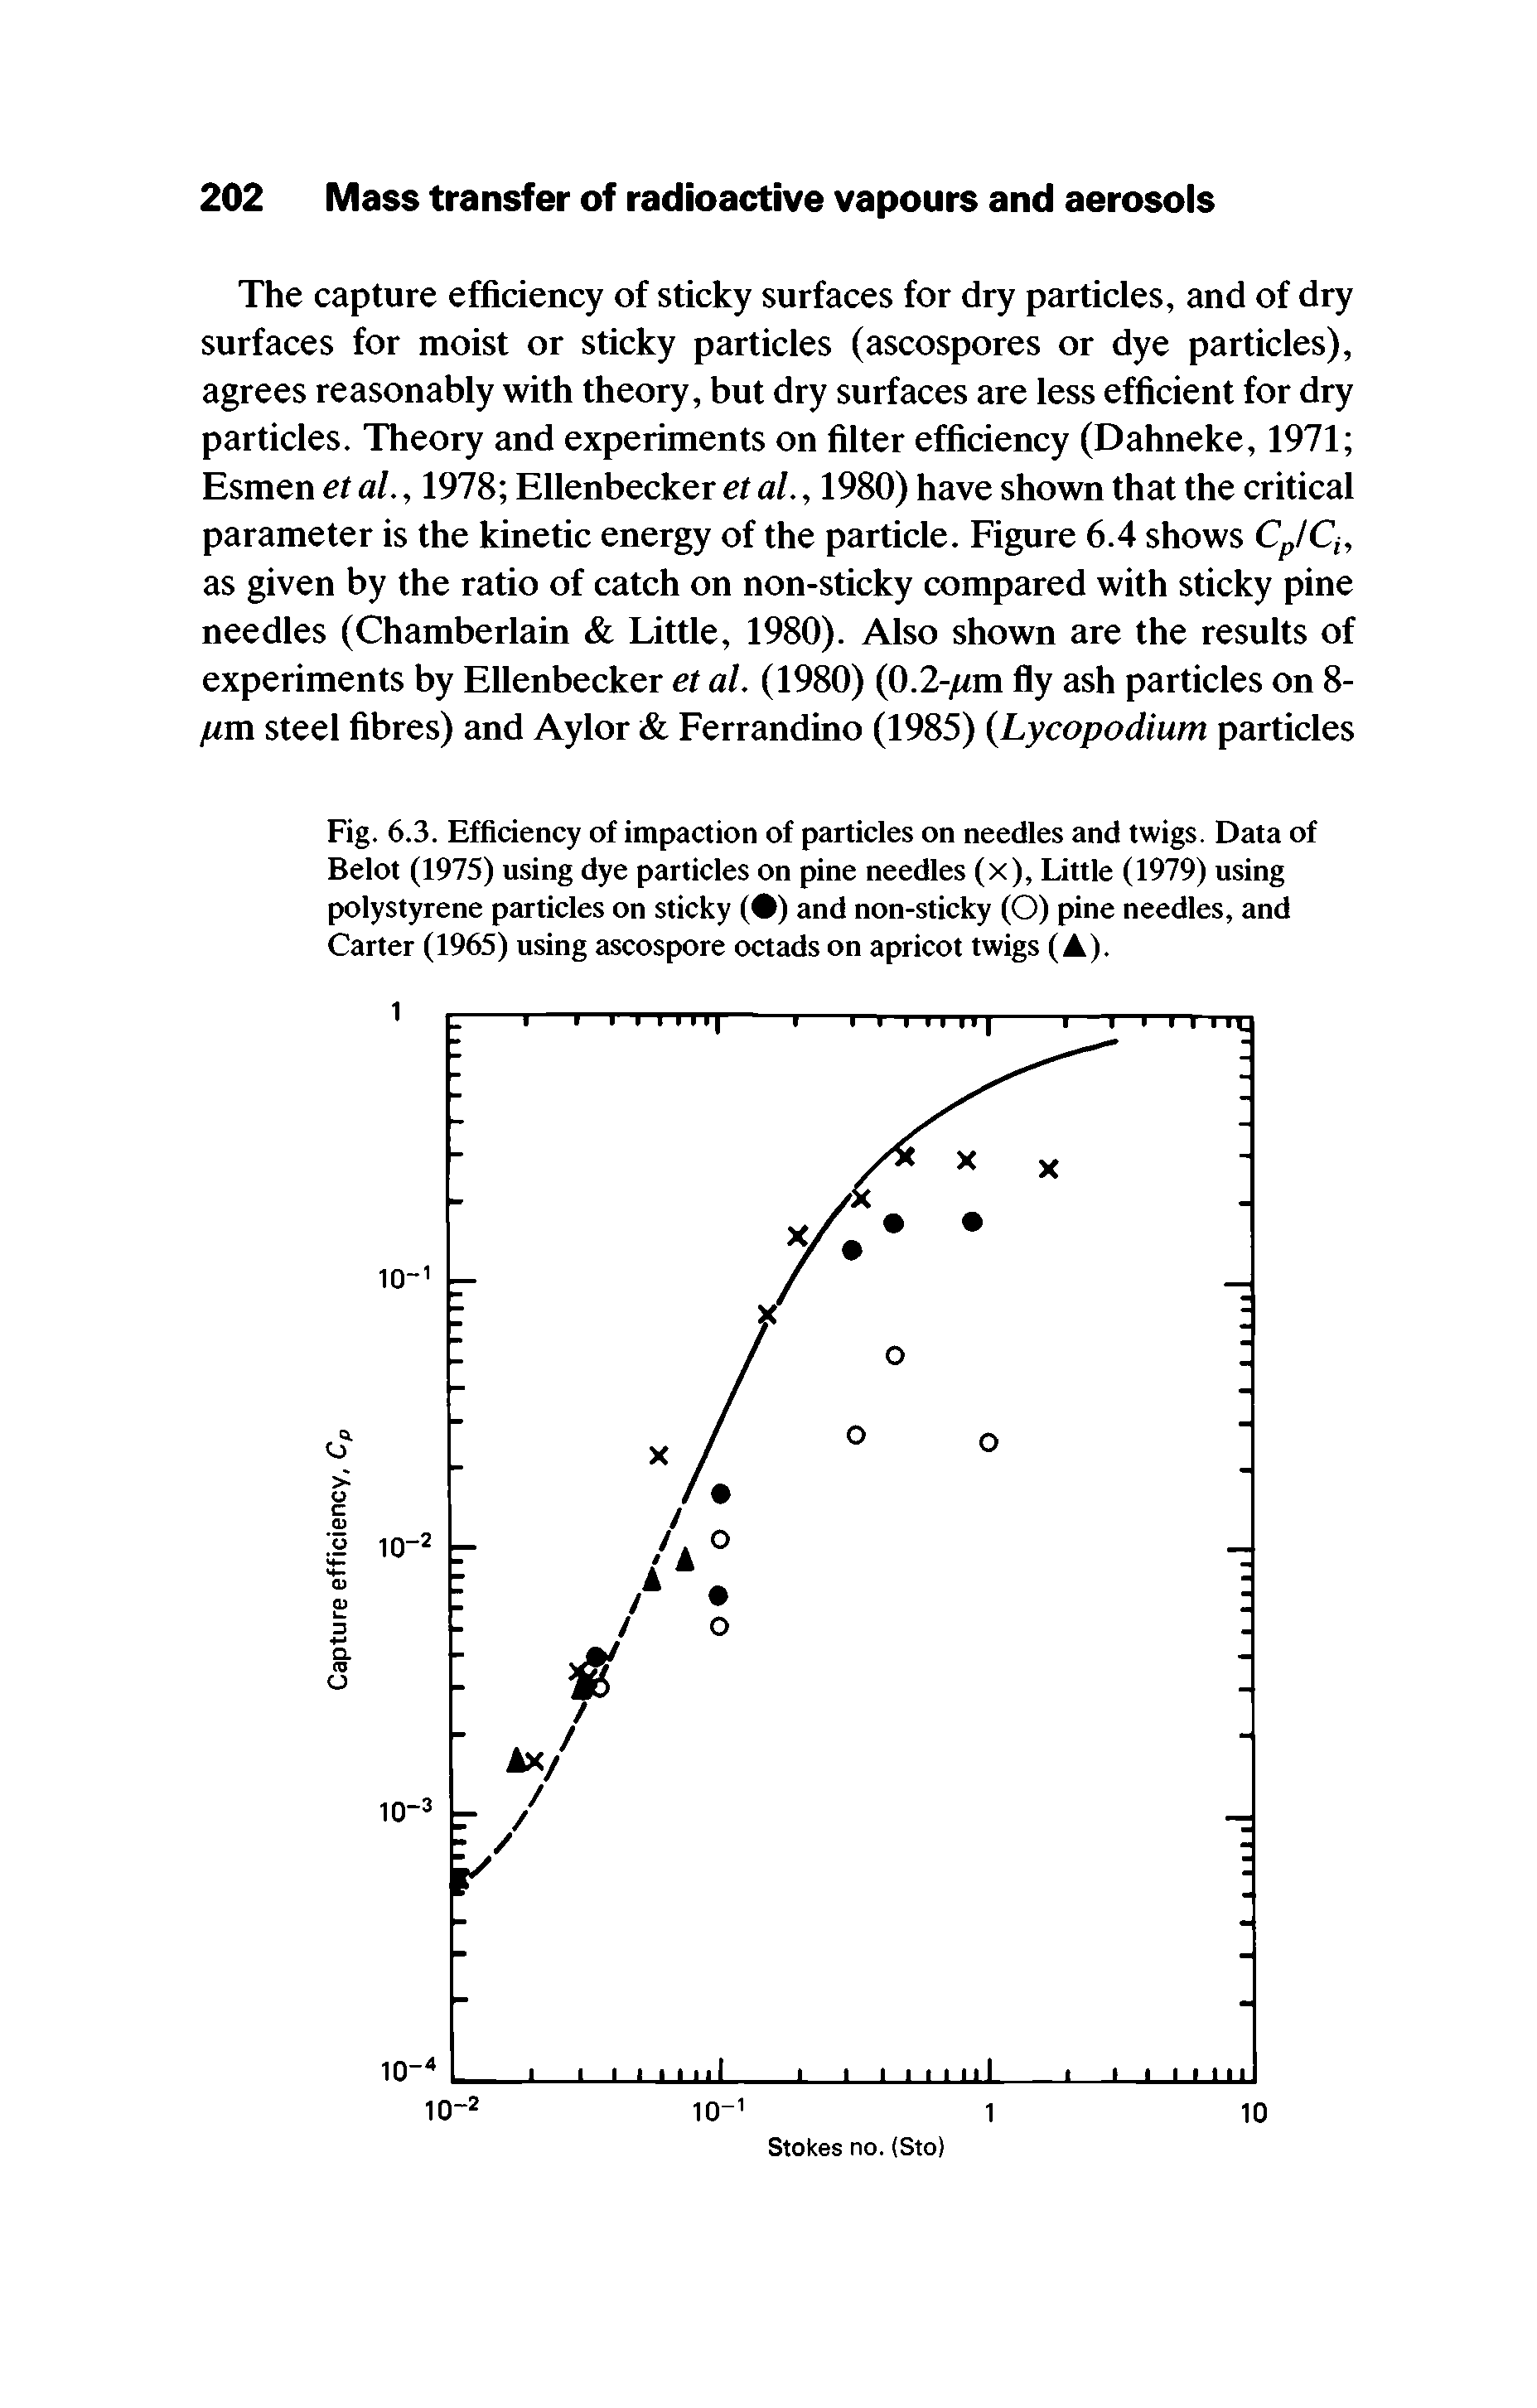 Fig. 6.3. Efficiency of impaction of particles on needles and twigs. Data of Belot (1975) using dye particles on pine needles (x), Little (1979) using polystyrene particles on sticky ( ) and non-sticky (O) pine needles, and Carter (1965) using ascospore octads on apricot twigs (A).